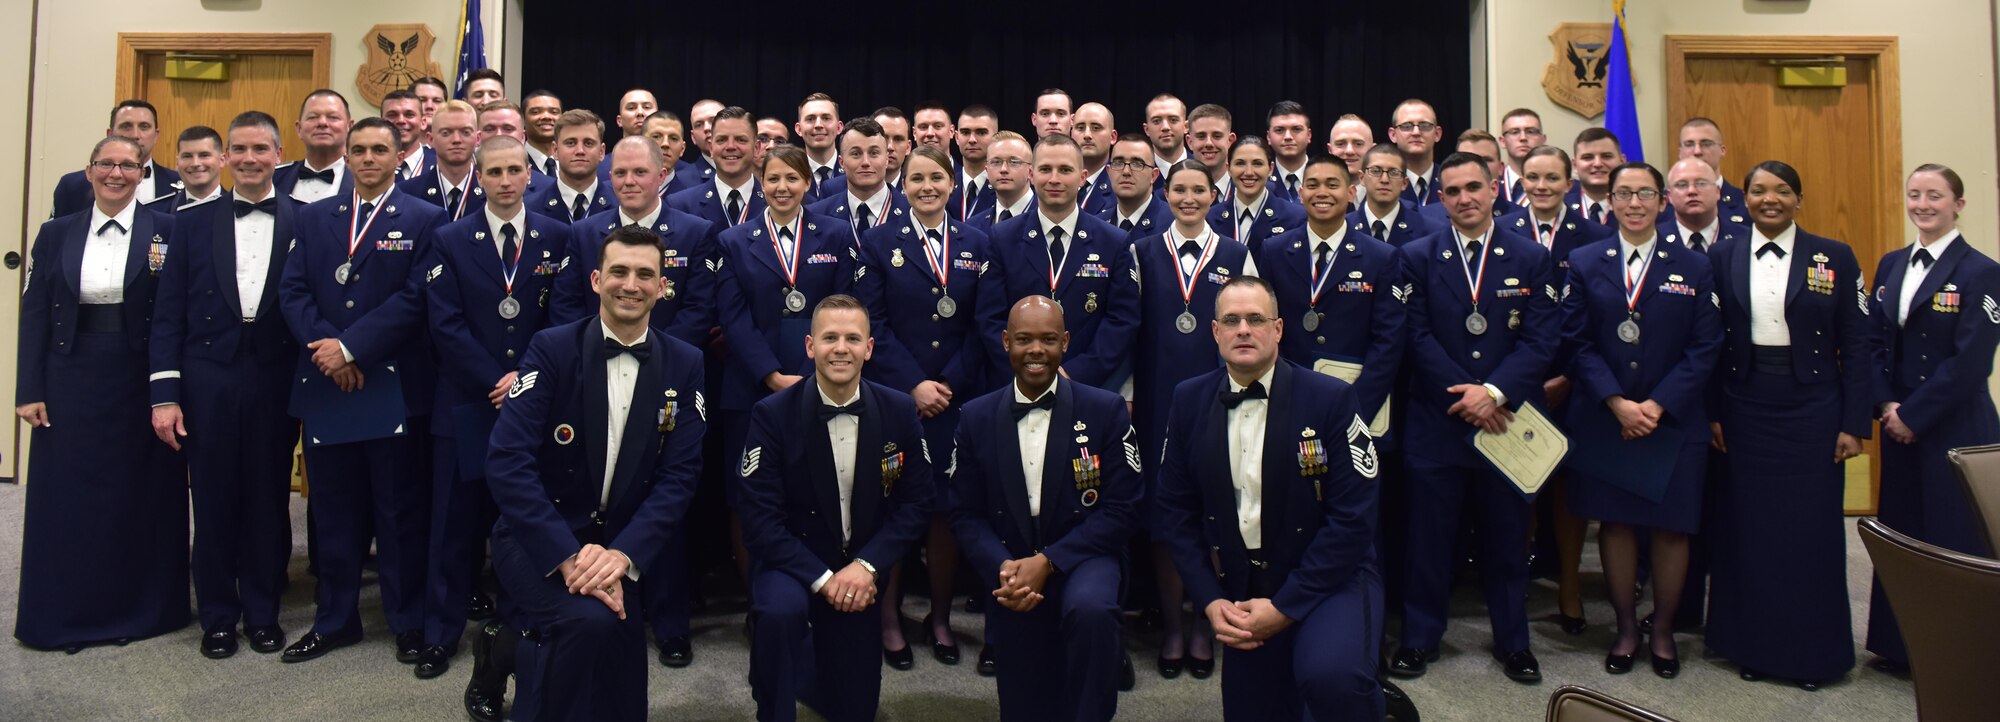 Graduates of Whiteman Airman Leadership School (ALS) class 17-D gather for a class photo after a graduation ceremony at Whiteman Air Force Base, Mo., May 4, 2017. ALS is a five-and-a-half week-long course that prepares senior airmen to supervise and lead Air Force teams, which supports the employment of air, space and cyberspace power. (U.S. Air Force photo by Senior Airman Jovan Banks)